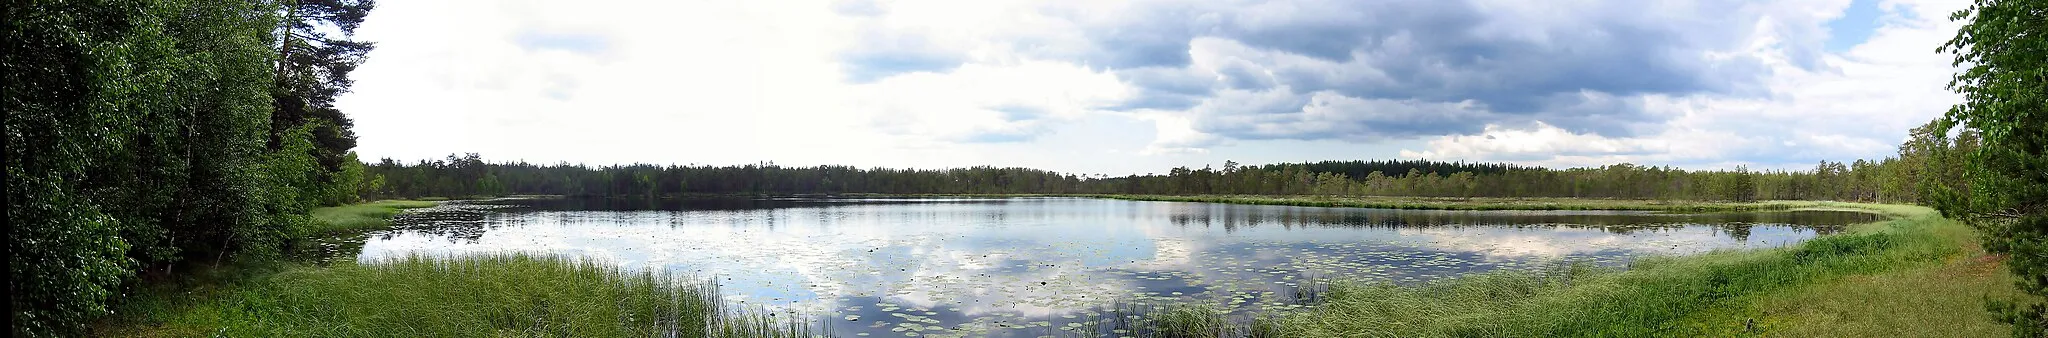 Photo showing: A panorama image of the swamp-shored lake Lakjärvi in the Kurjenrahka National Park, located in Western Finland